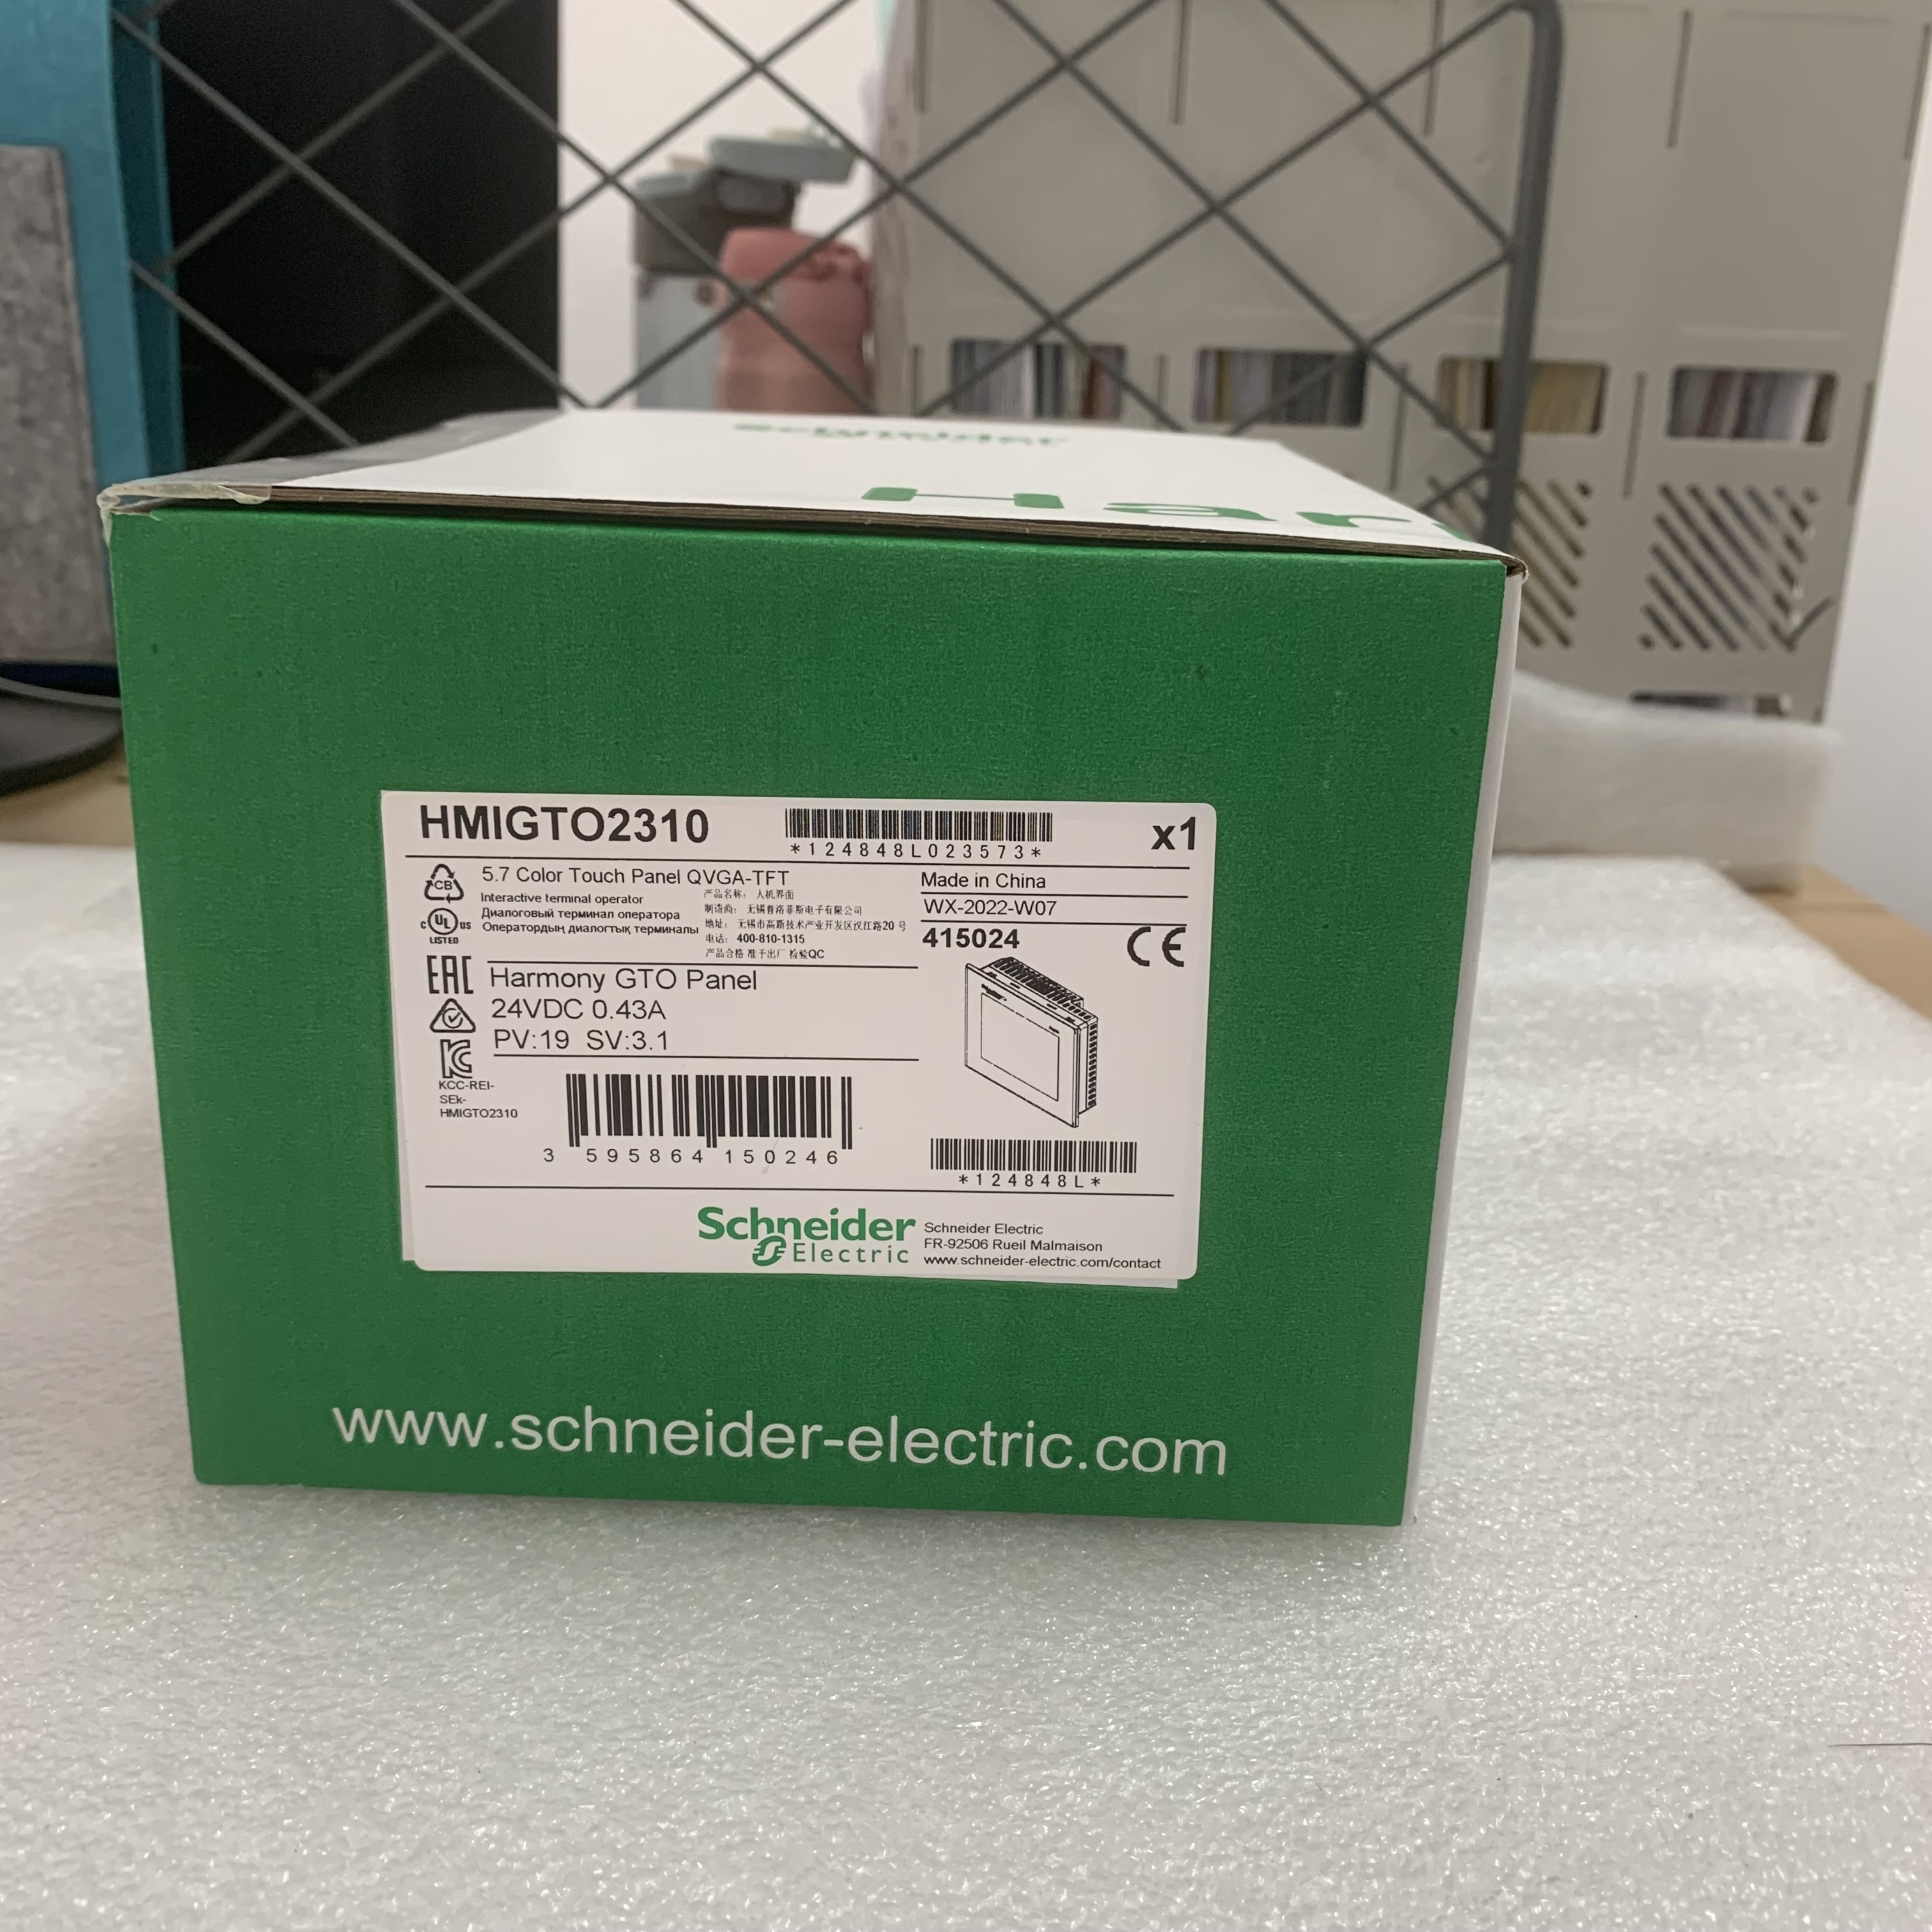 Schneider HMIGTO2310 OPERATOR INTERFACE ADVANCED TOUCHSCREEN PANEL 5.7 INCH NEW